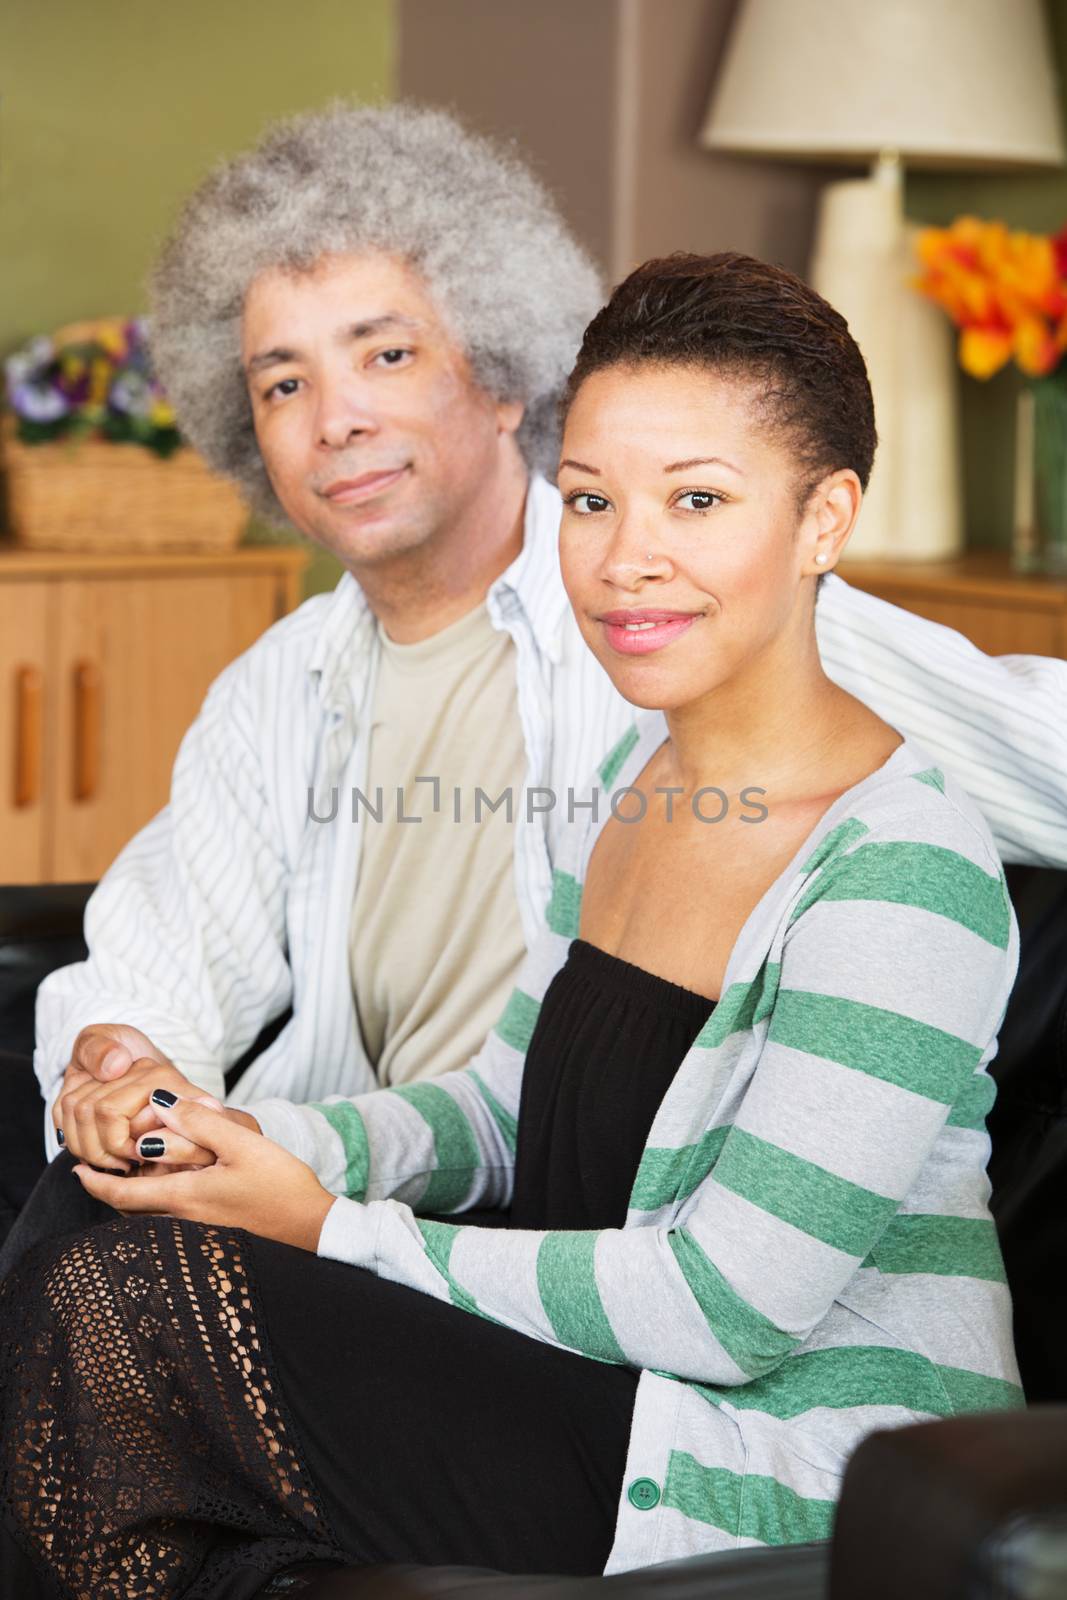 Attractive young and middle aged Black couple holding hands